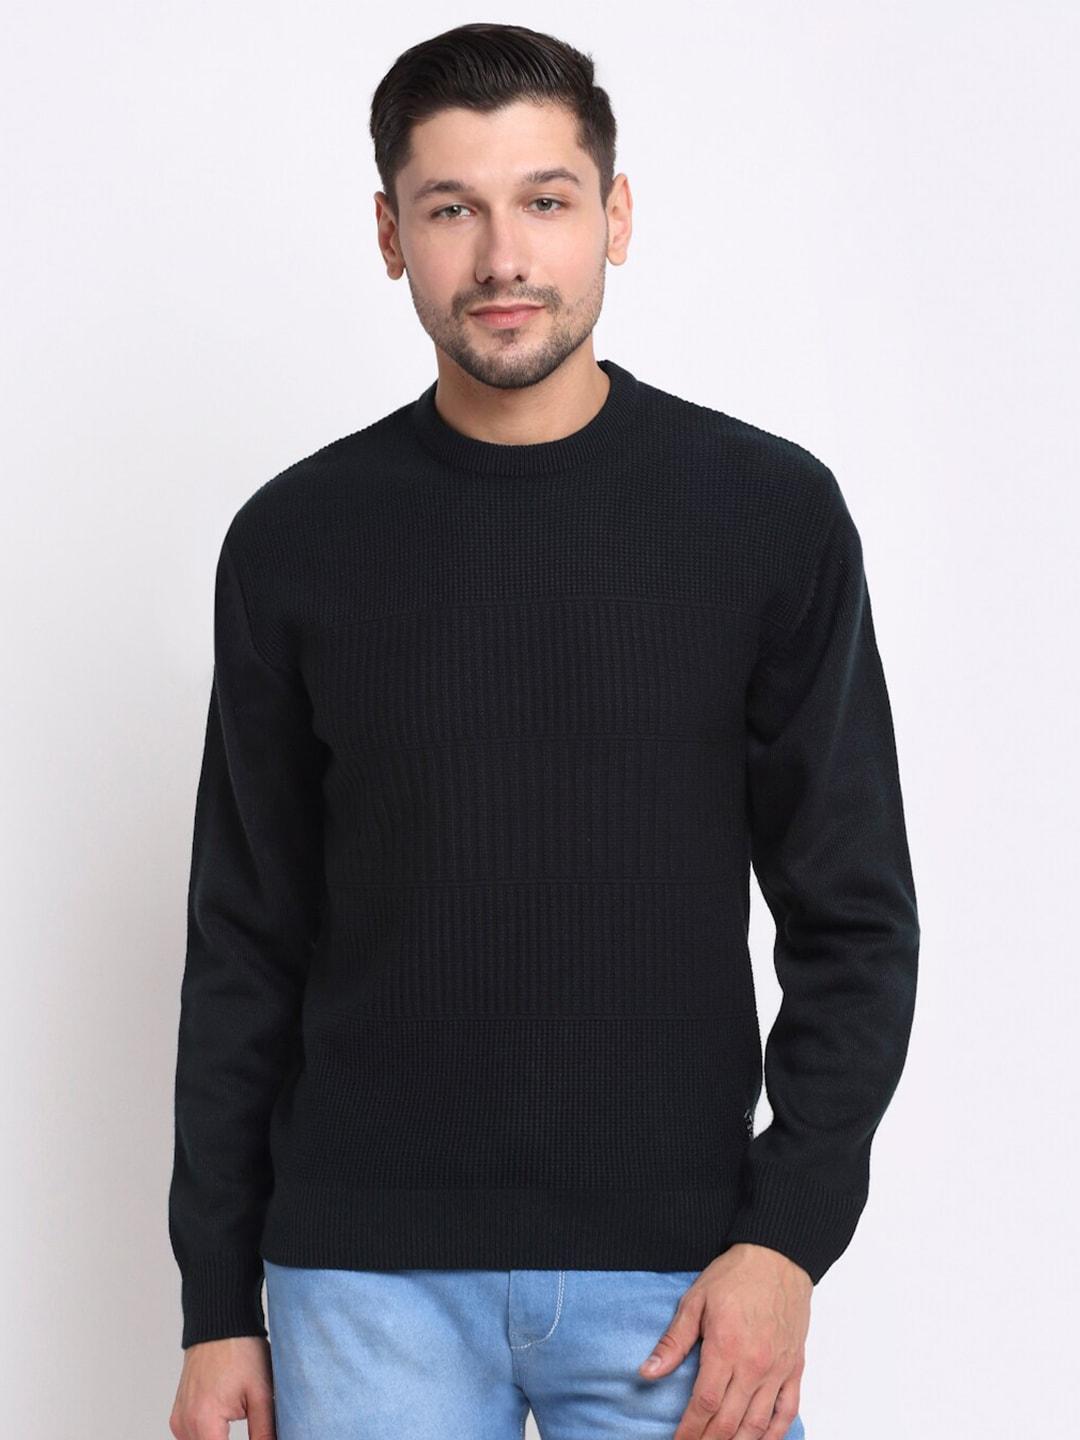 cantabil-men-charcoal-grey-ribbed-pure-woolen-pullover-sweater